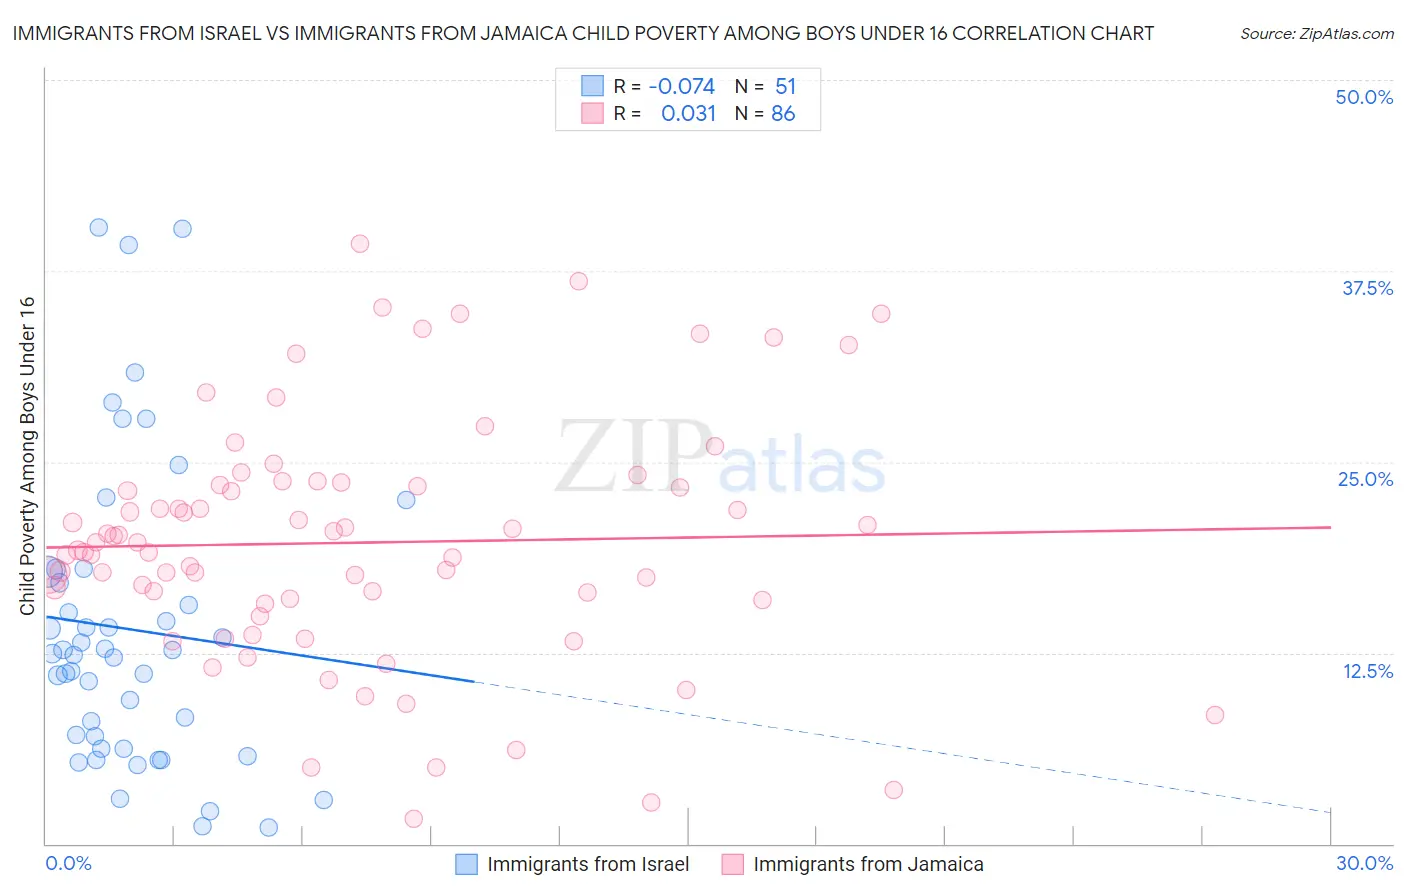 Immigrants from Israel vs Immigrants from Jamaica Child Poverty Among Boys Under 16